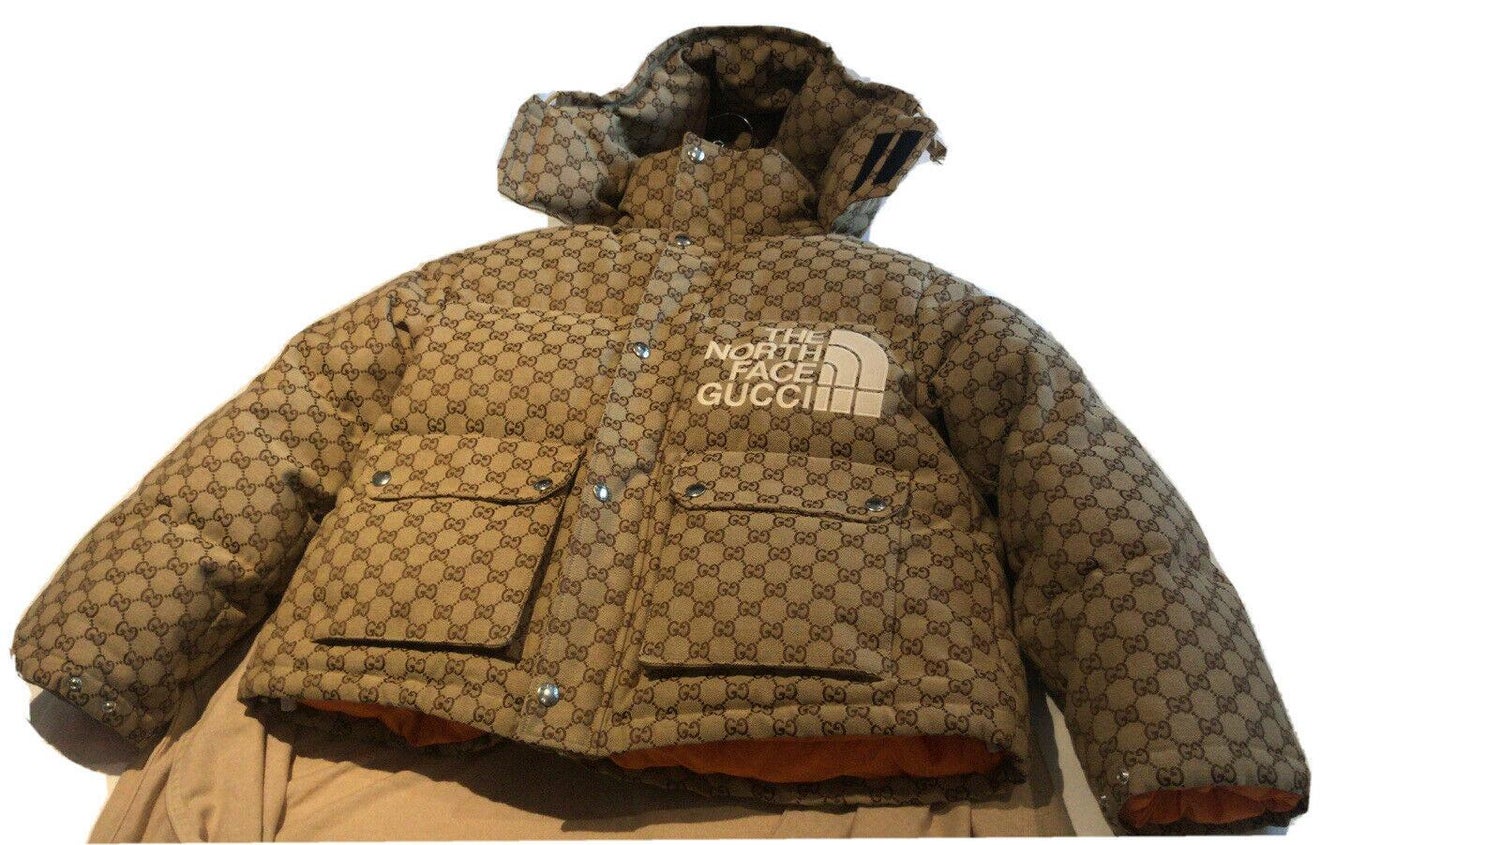 Gucci Special Order North Face Gg Print Monogram 21 Collection Medium Unisex For Sale At 1stdibs Gucci North Face